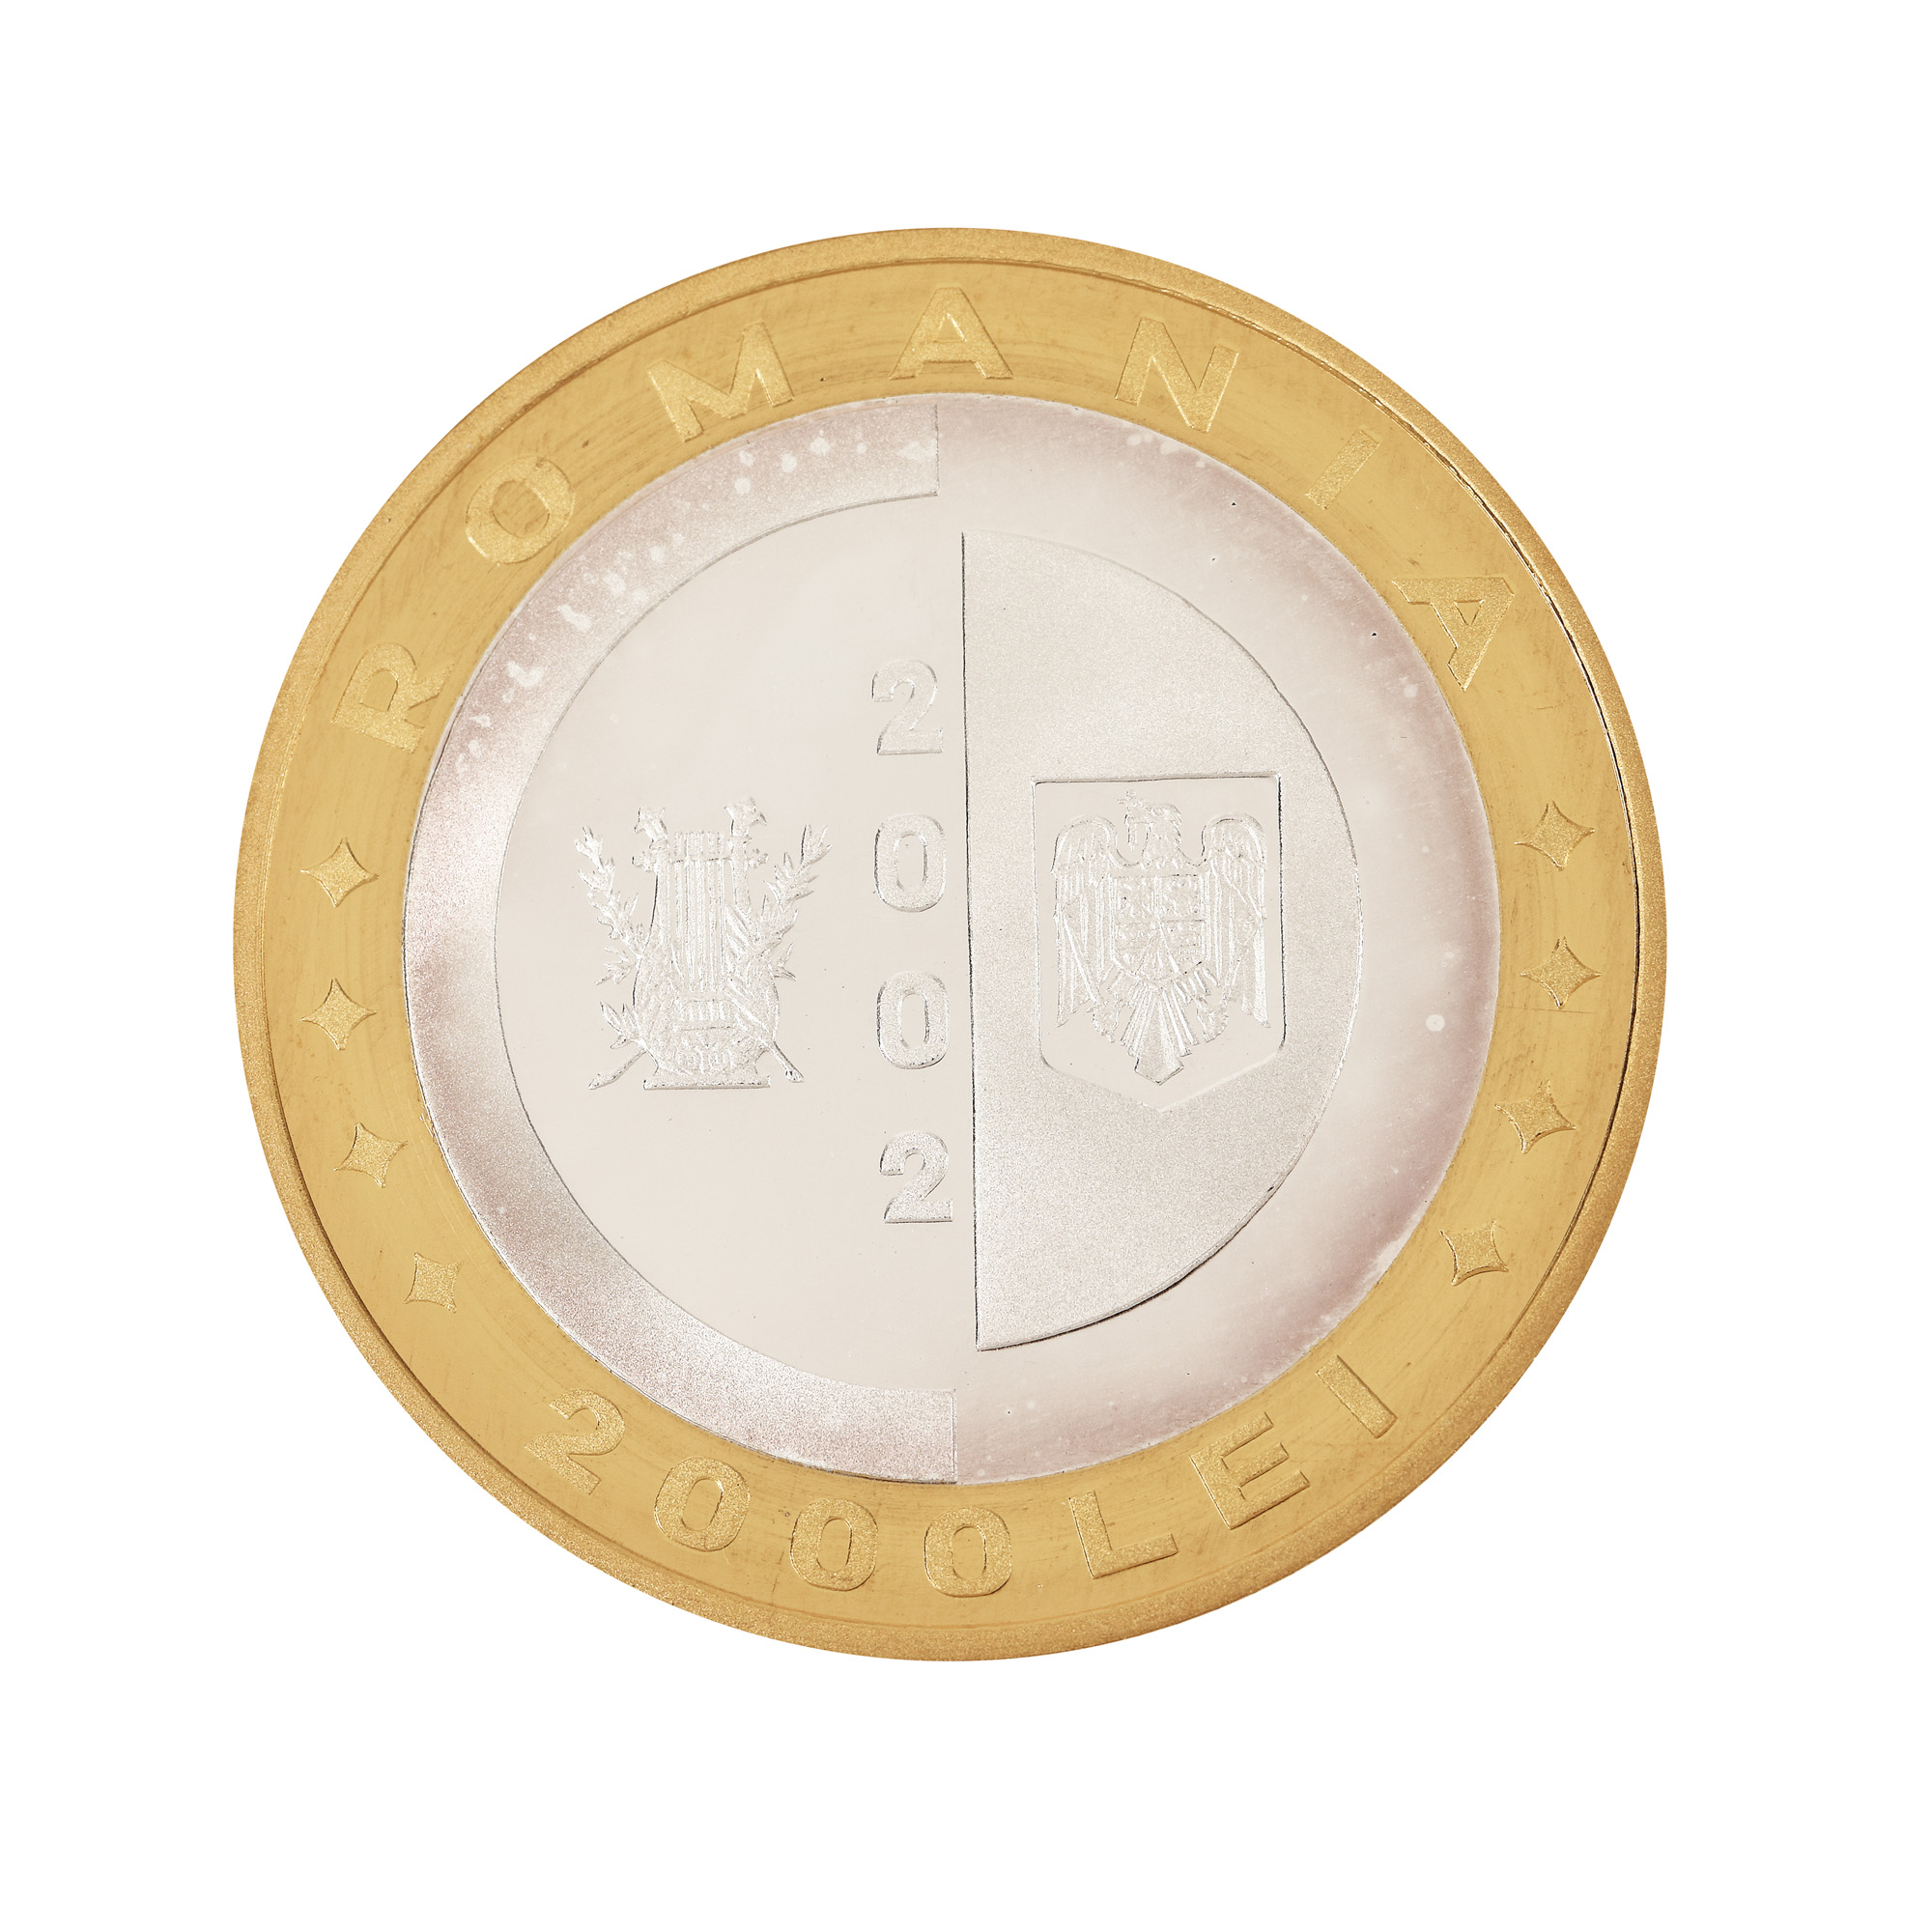 BNR commemorative coin, Ion Heliade Rădulescu, 1802-2002, bimetal - silver core and gold outer ring - Image 2 of 2